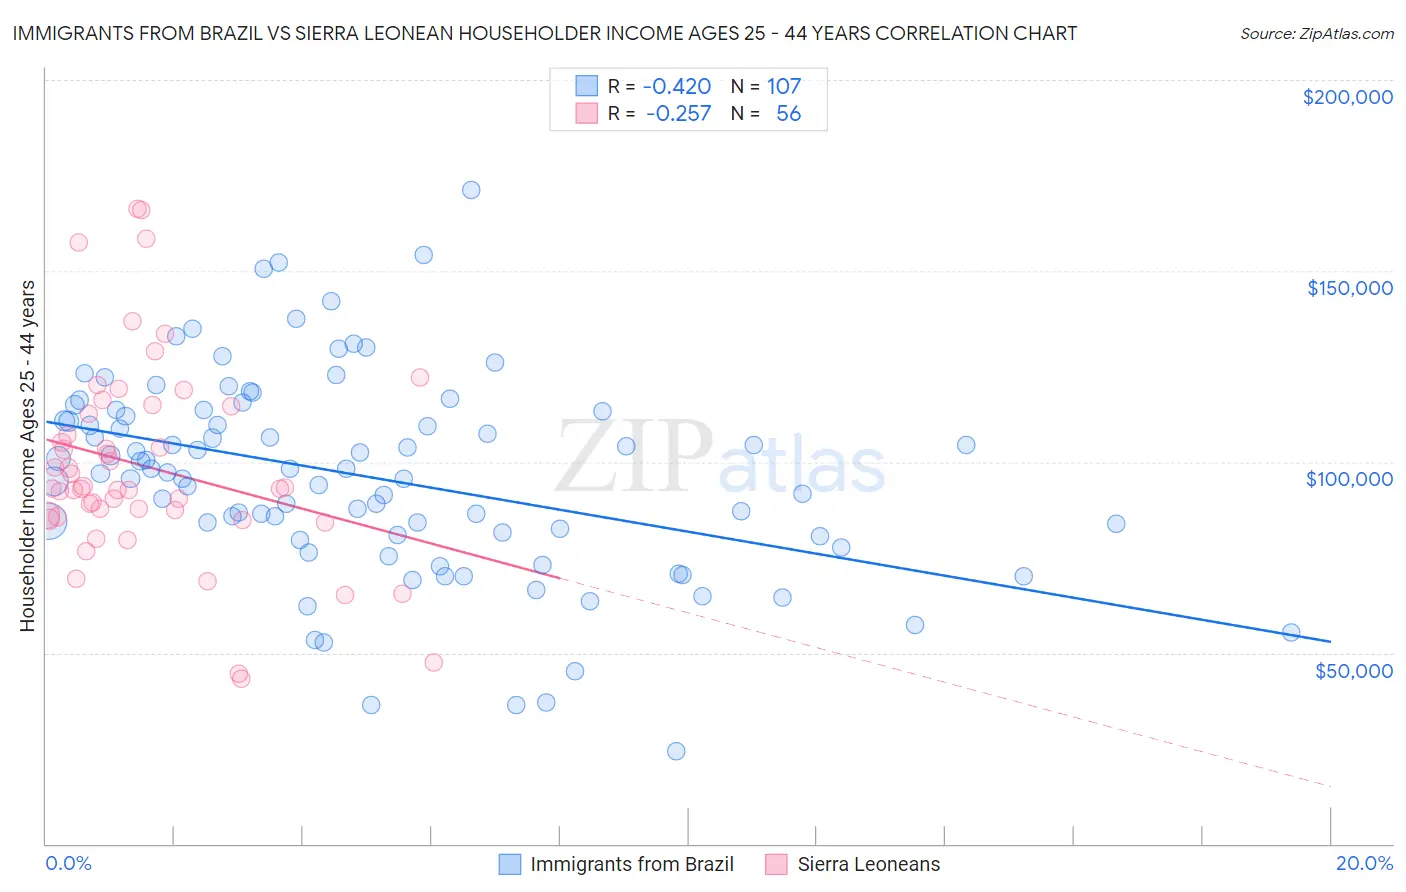 Immigrants from Brazil vs Sierra Leonean Householder Income Ages 25 - 44 years